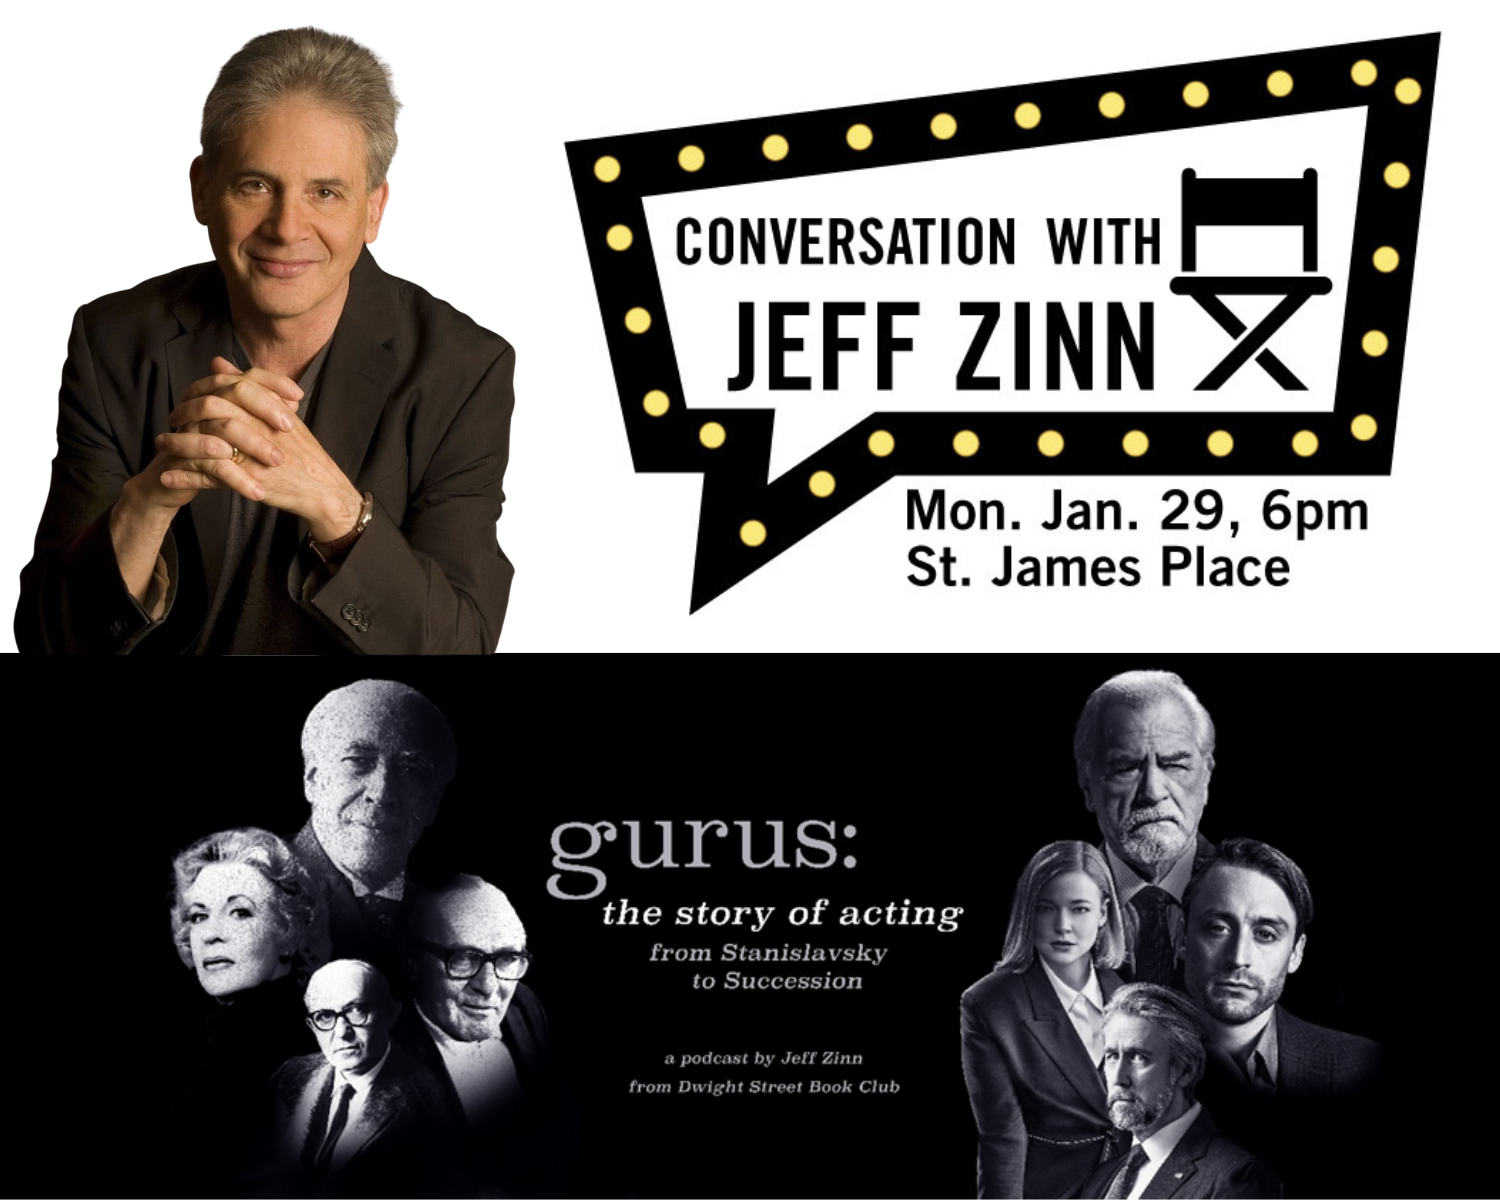 GBPT: "Conversations With" Series Featuring Jeff Zinn